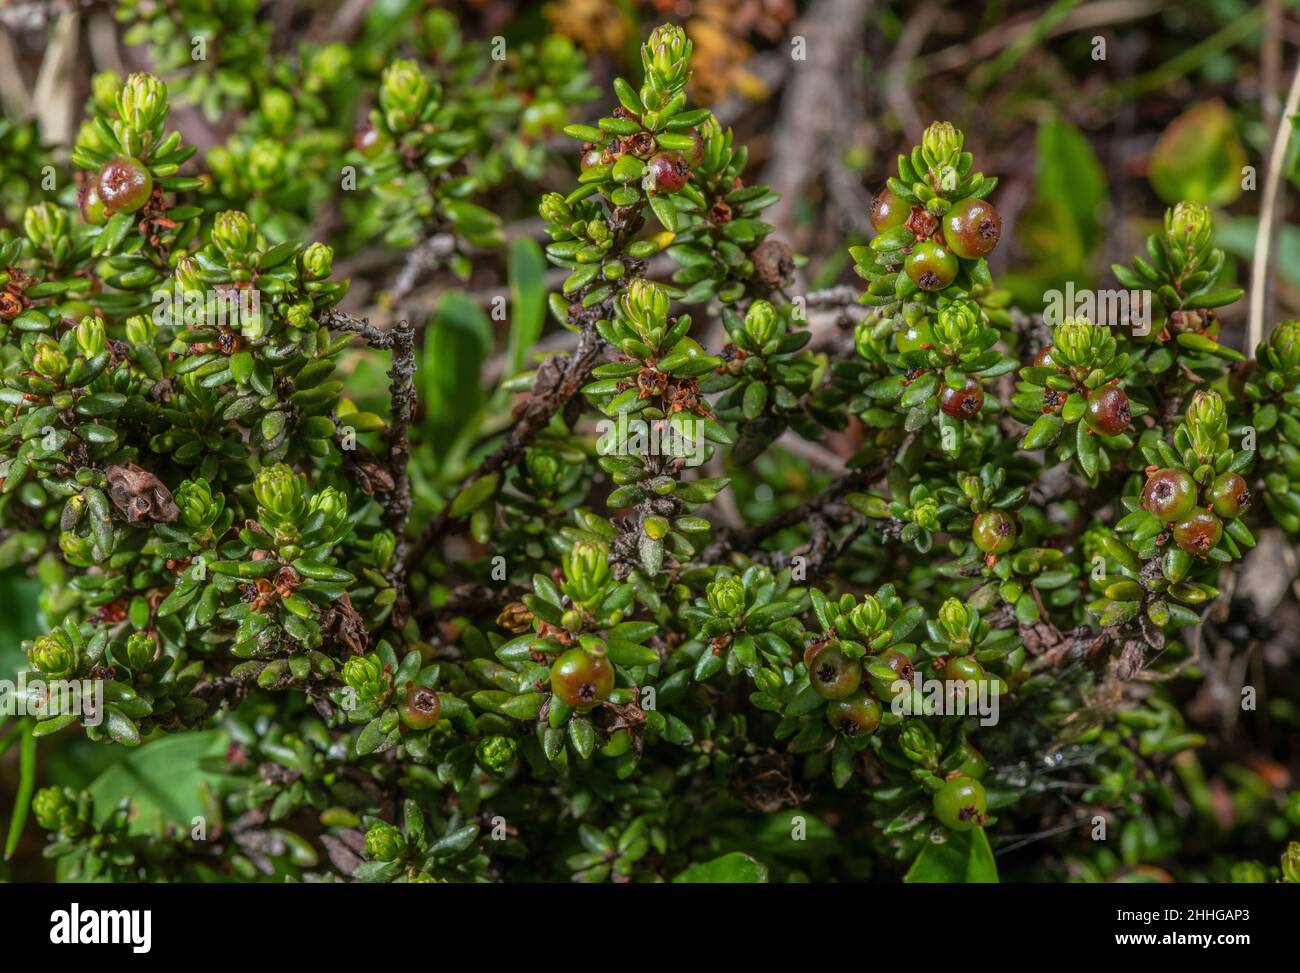 Crowberry, Empetrum nigrum subsp. hermaphroditum, with fading flowers and ripening berries. Stock Photo